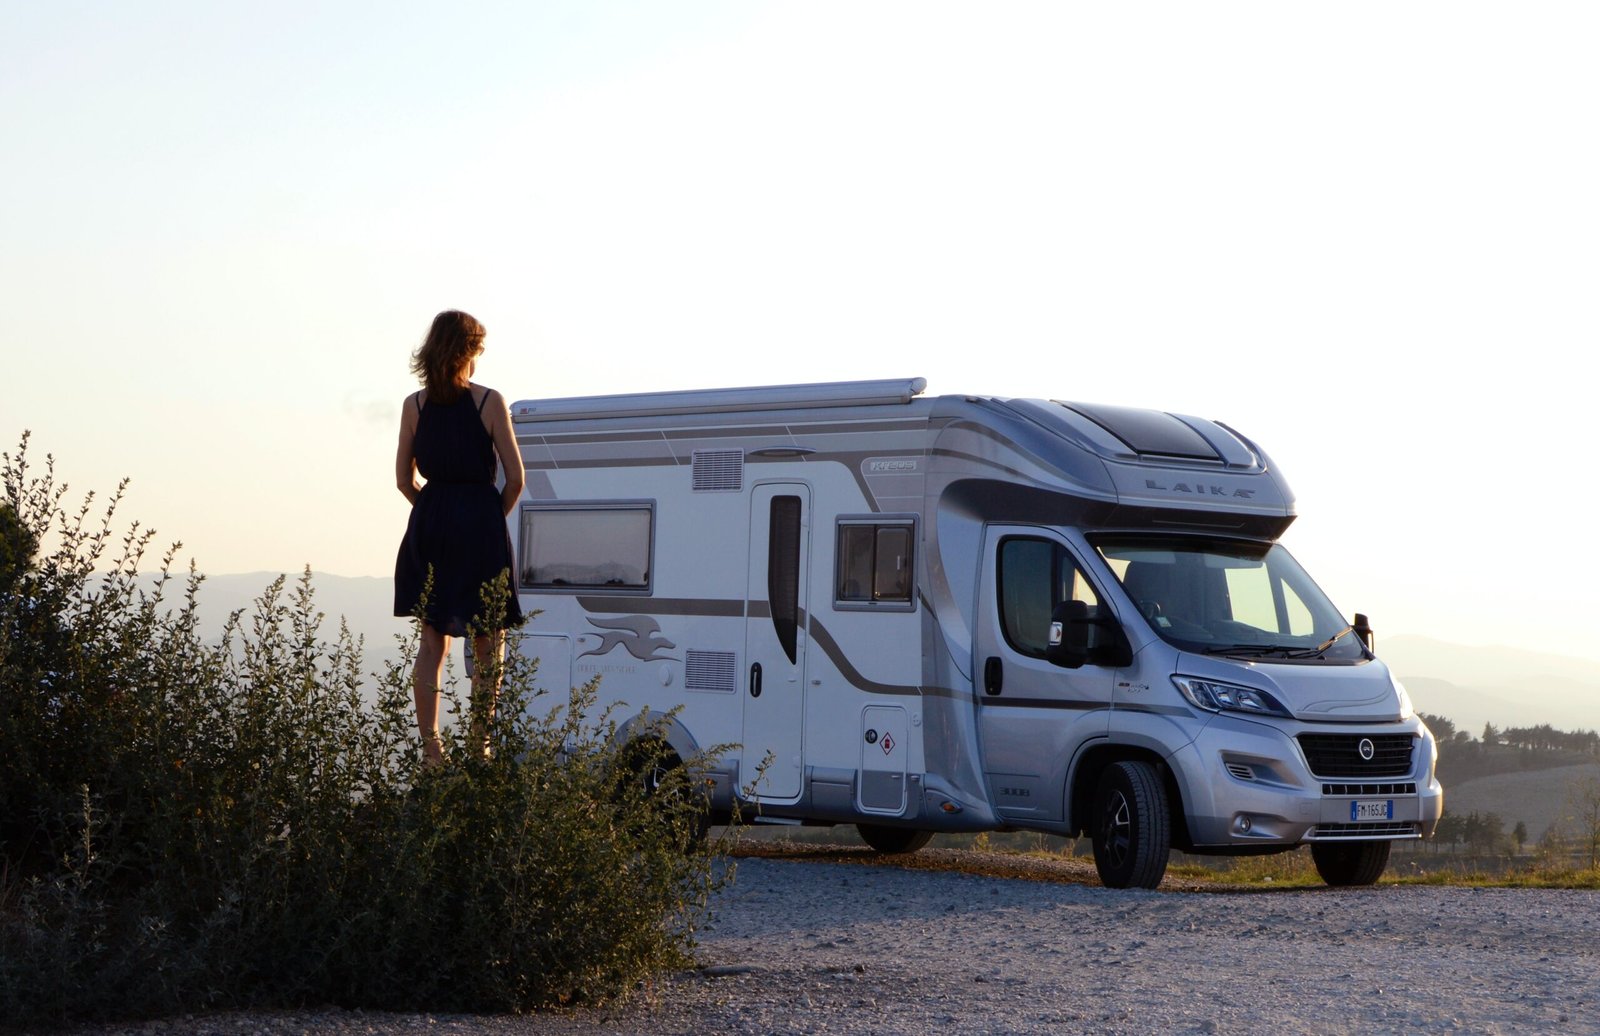 Travel without limits: Buy and rent motorhomes and camper vans for unforgettable experiences